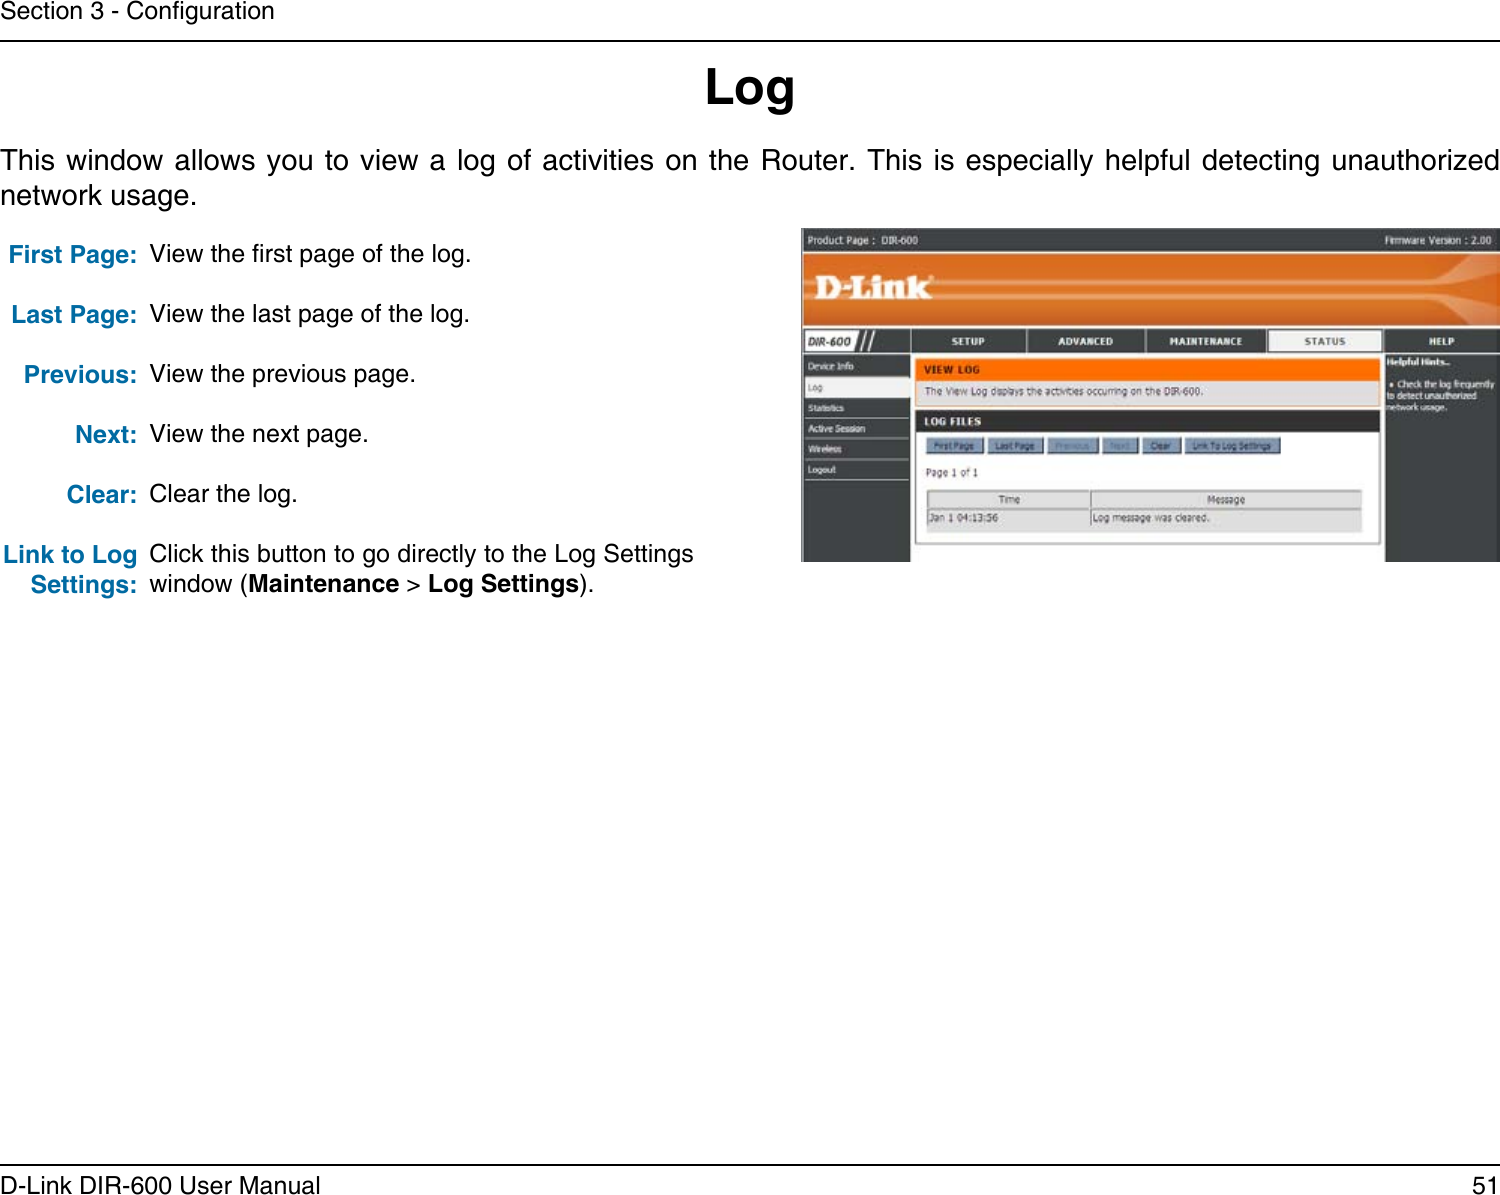 51D-Link DIR-600 User ManualSection 3 - CongurationLogFirst Page:Last Page:Previous:Next:Clear:Link to Log Settings:View the rst page of the log.View the last page of the log.View the previous page.View the next page.Clear the log.Click this button to go directly to the Log Settings window (Maintenance &gt; Log Settings).This window allows you to view a  log of activities on the Router. This  is especially helpful detecting unauthorized network usage.